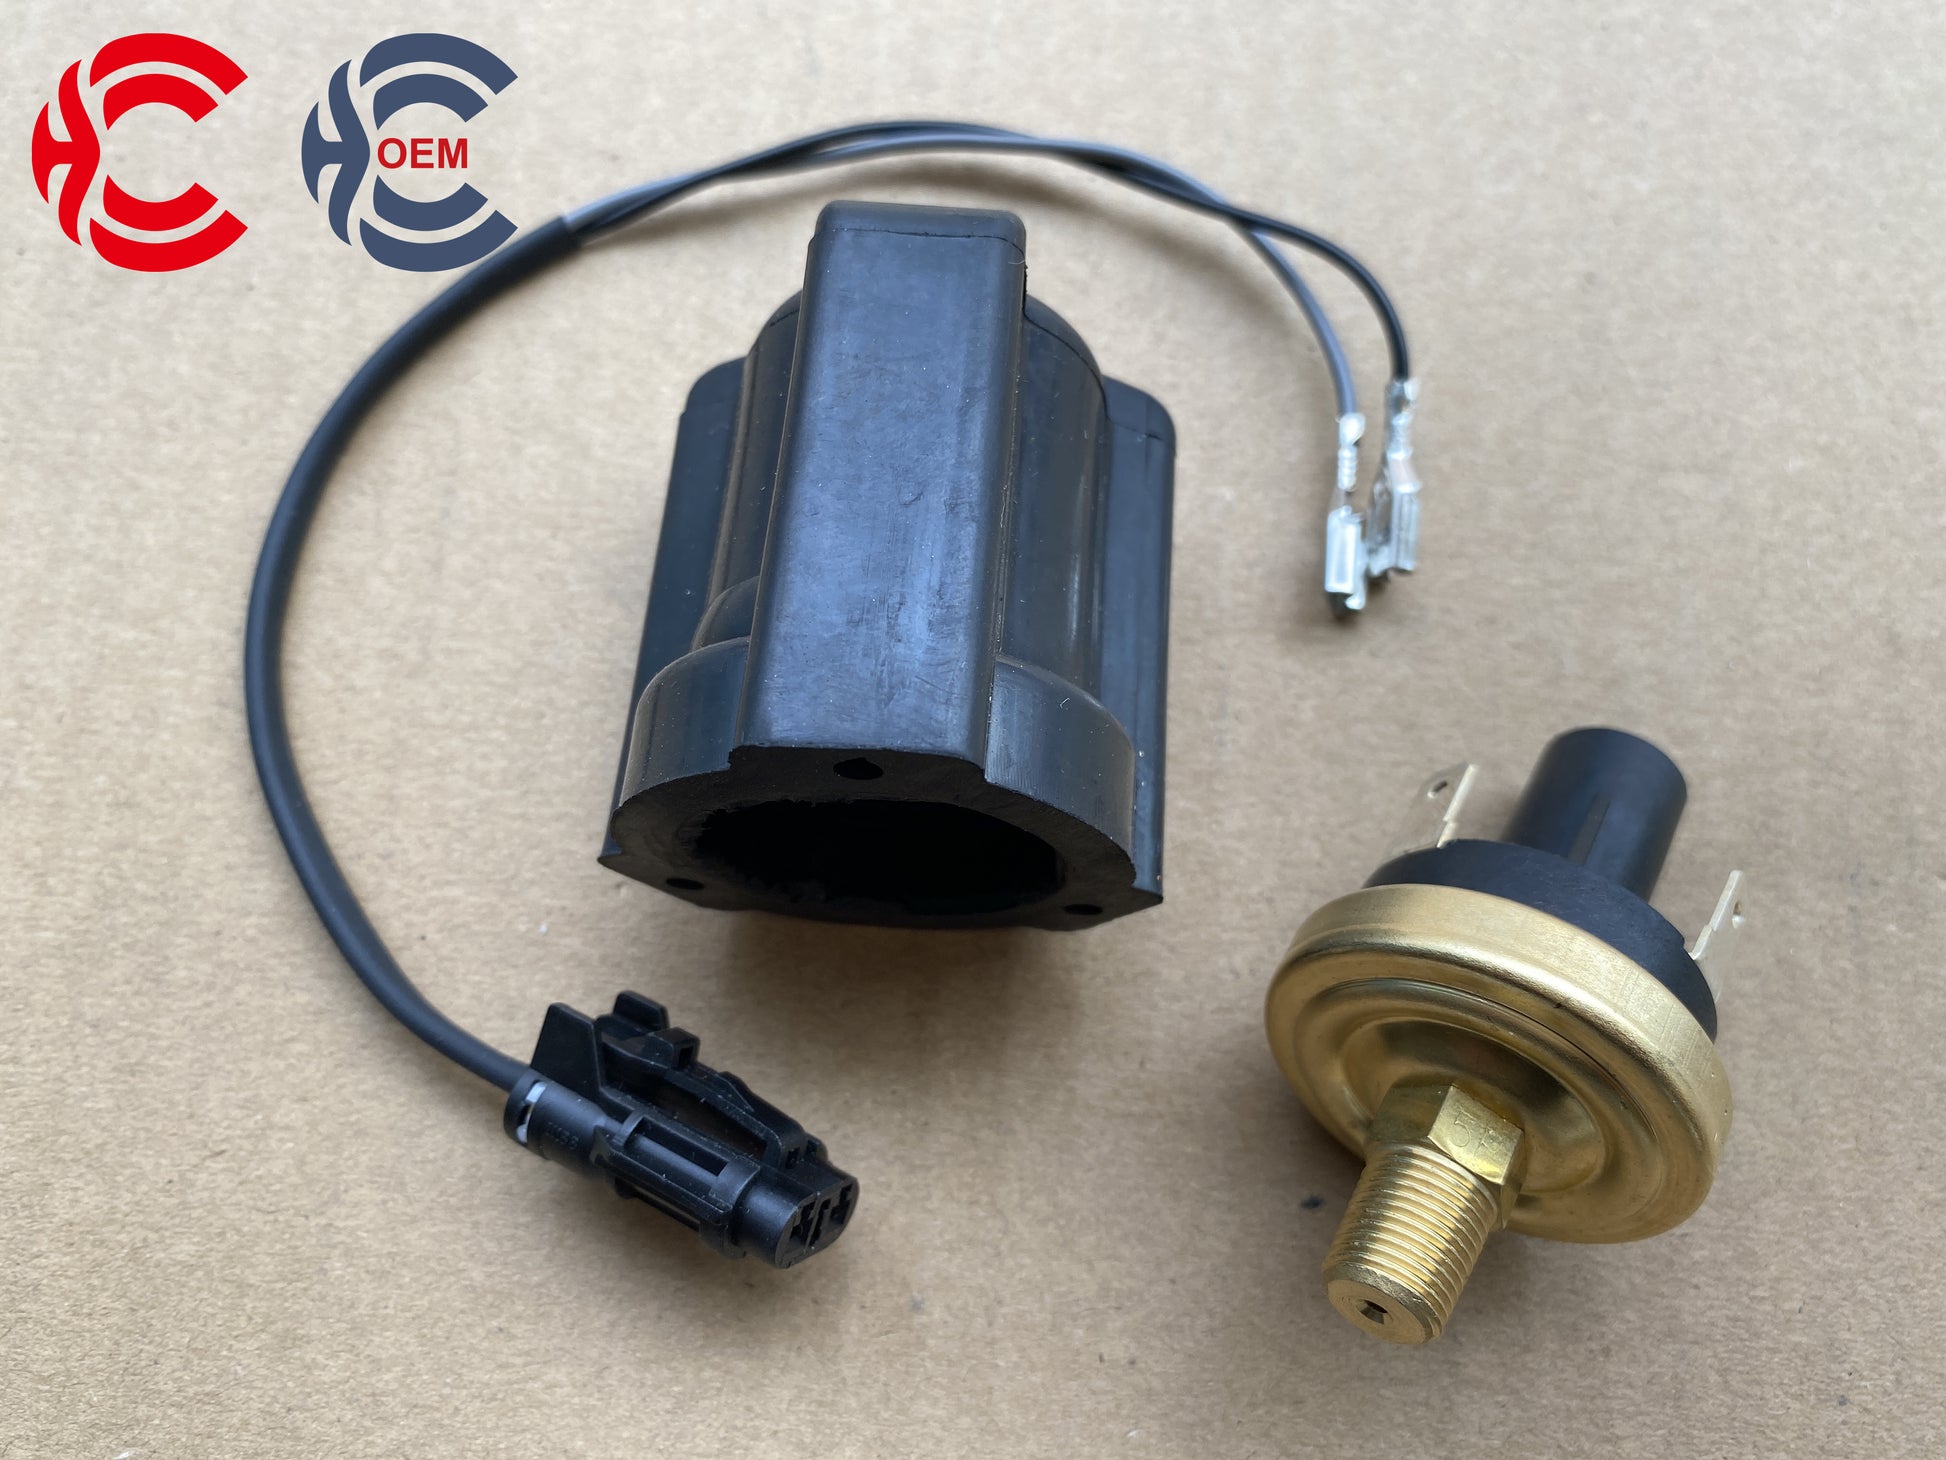 OEM: 5Psi Retarder Gas Pressure SwitchMaterial: ABS MetalColor: Black SilverOrigin: Made in ChinaWeight: 50gPacking List: 1* Gas Pressure Switch More ServiceWe can provide OEM Manufacturing serviceWe can Be your one-step solution for Auto PartsWe can provide technical scheme for you Feel Free to Contact Us, We will get back to you as soon as possible.